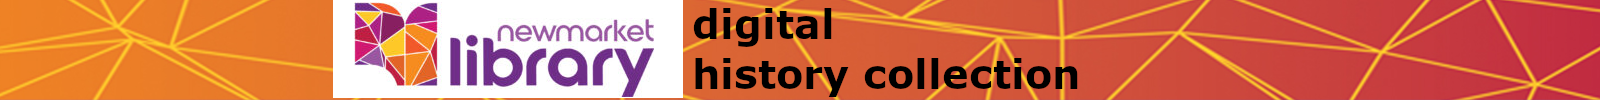 Newmarket Public Library Digital History Collection